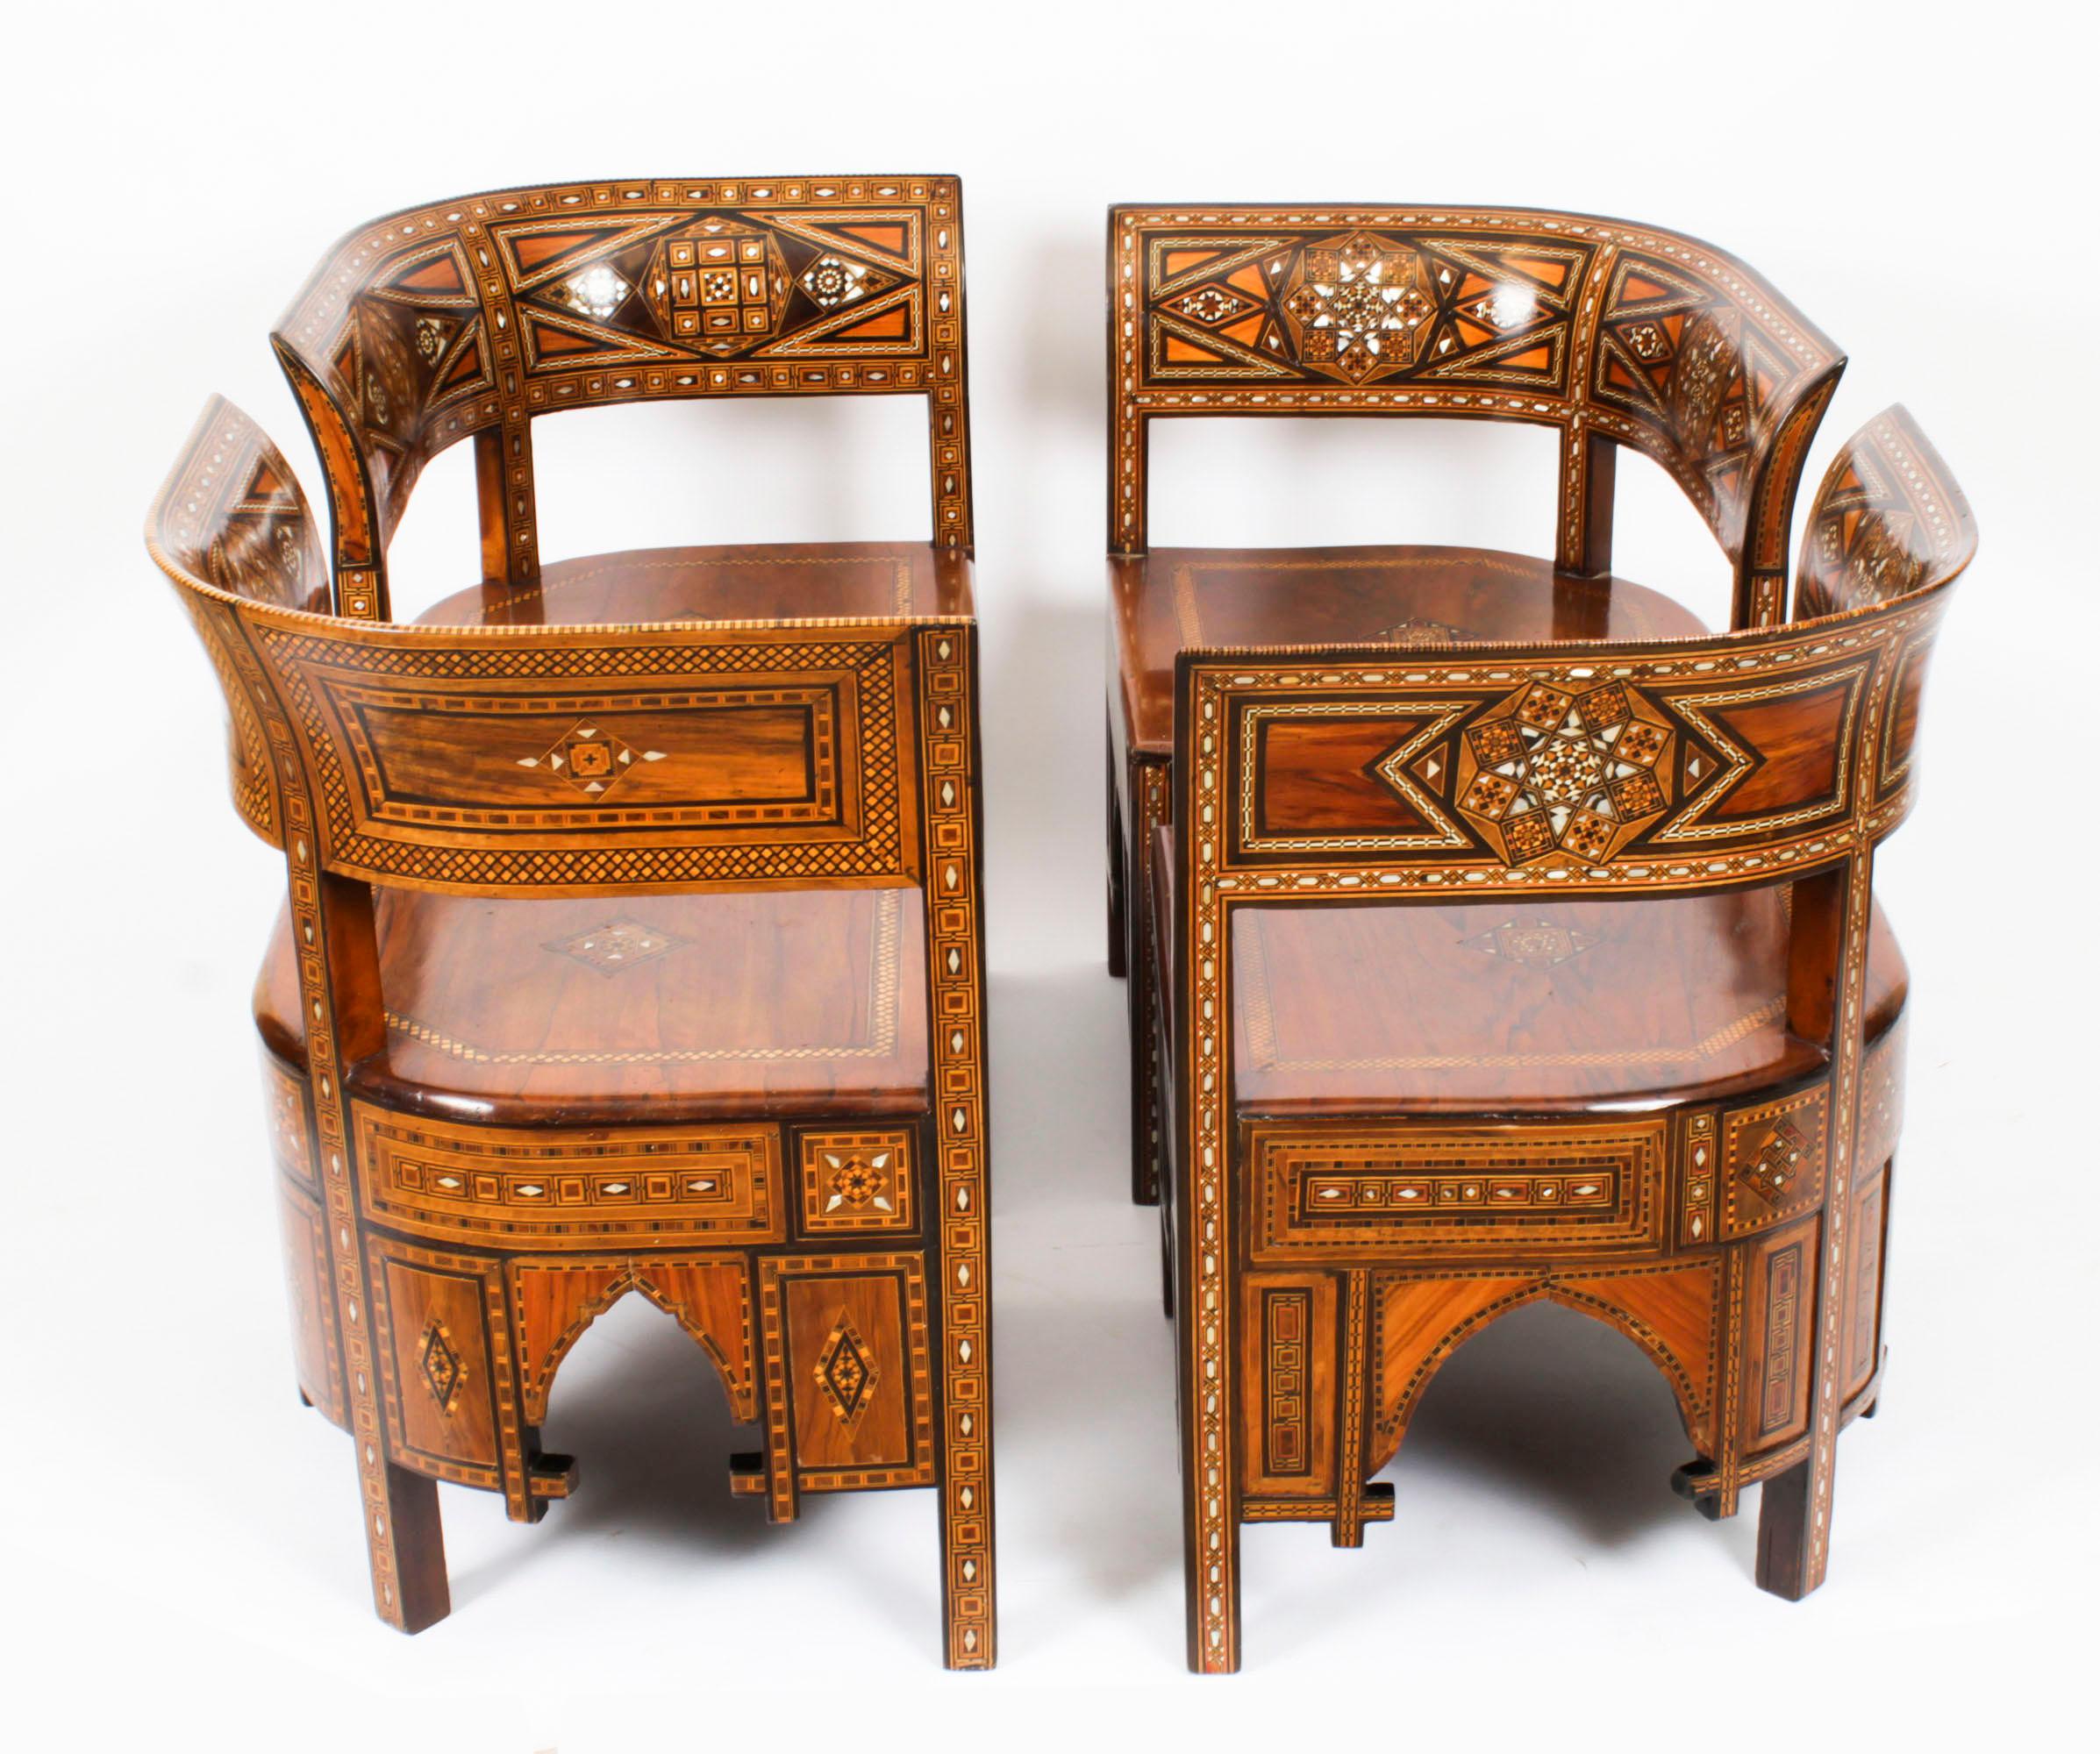 Antique Set of 4 Syrian Parquetry Inlaid Armchairs, Early 20th Century For Sale 15